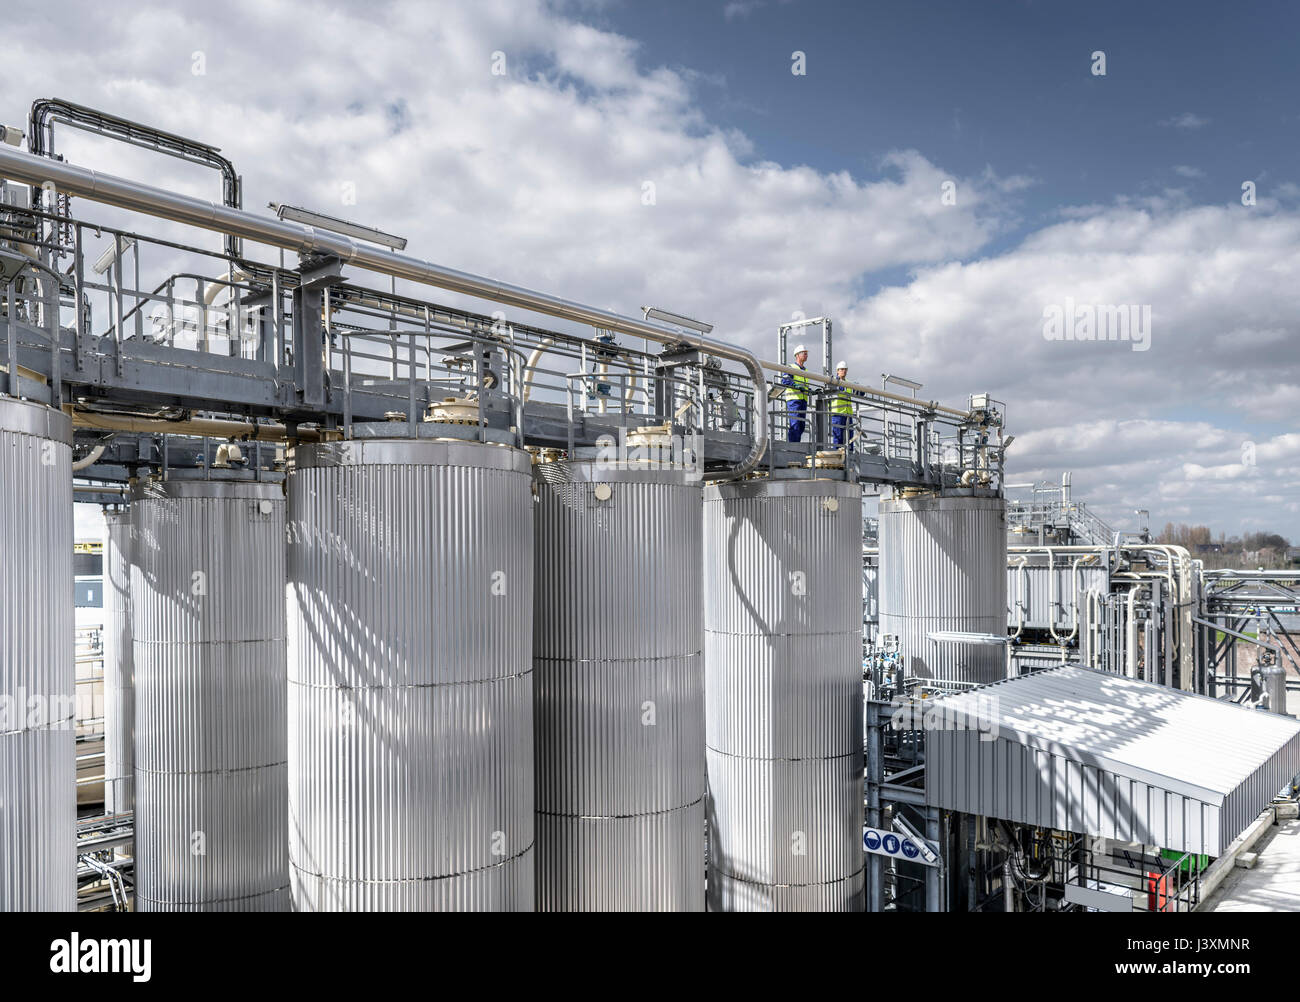 Workers on top of process plant in oil blending factory Stock Photo